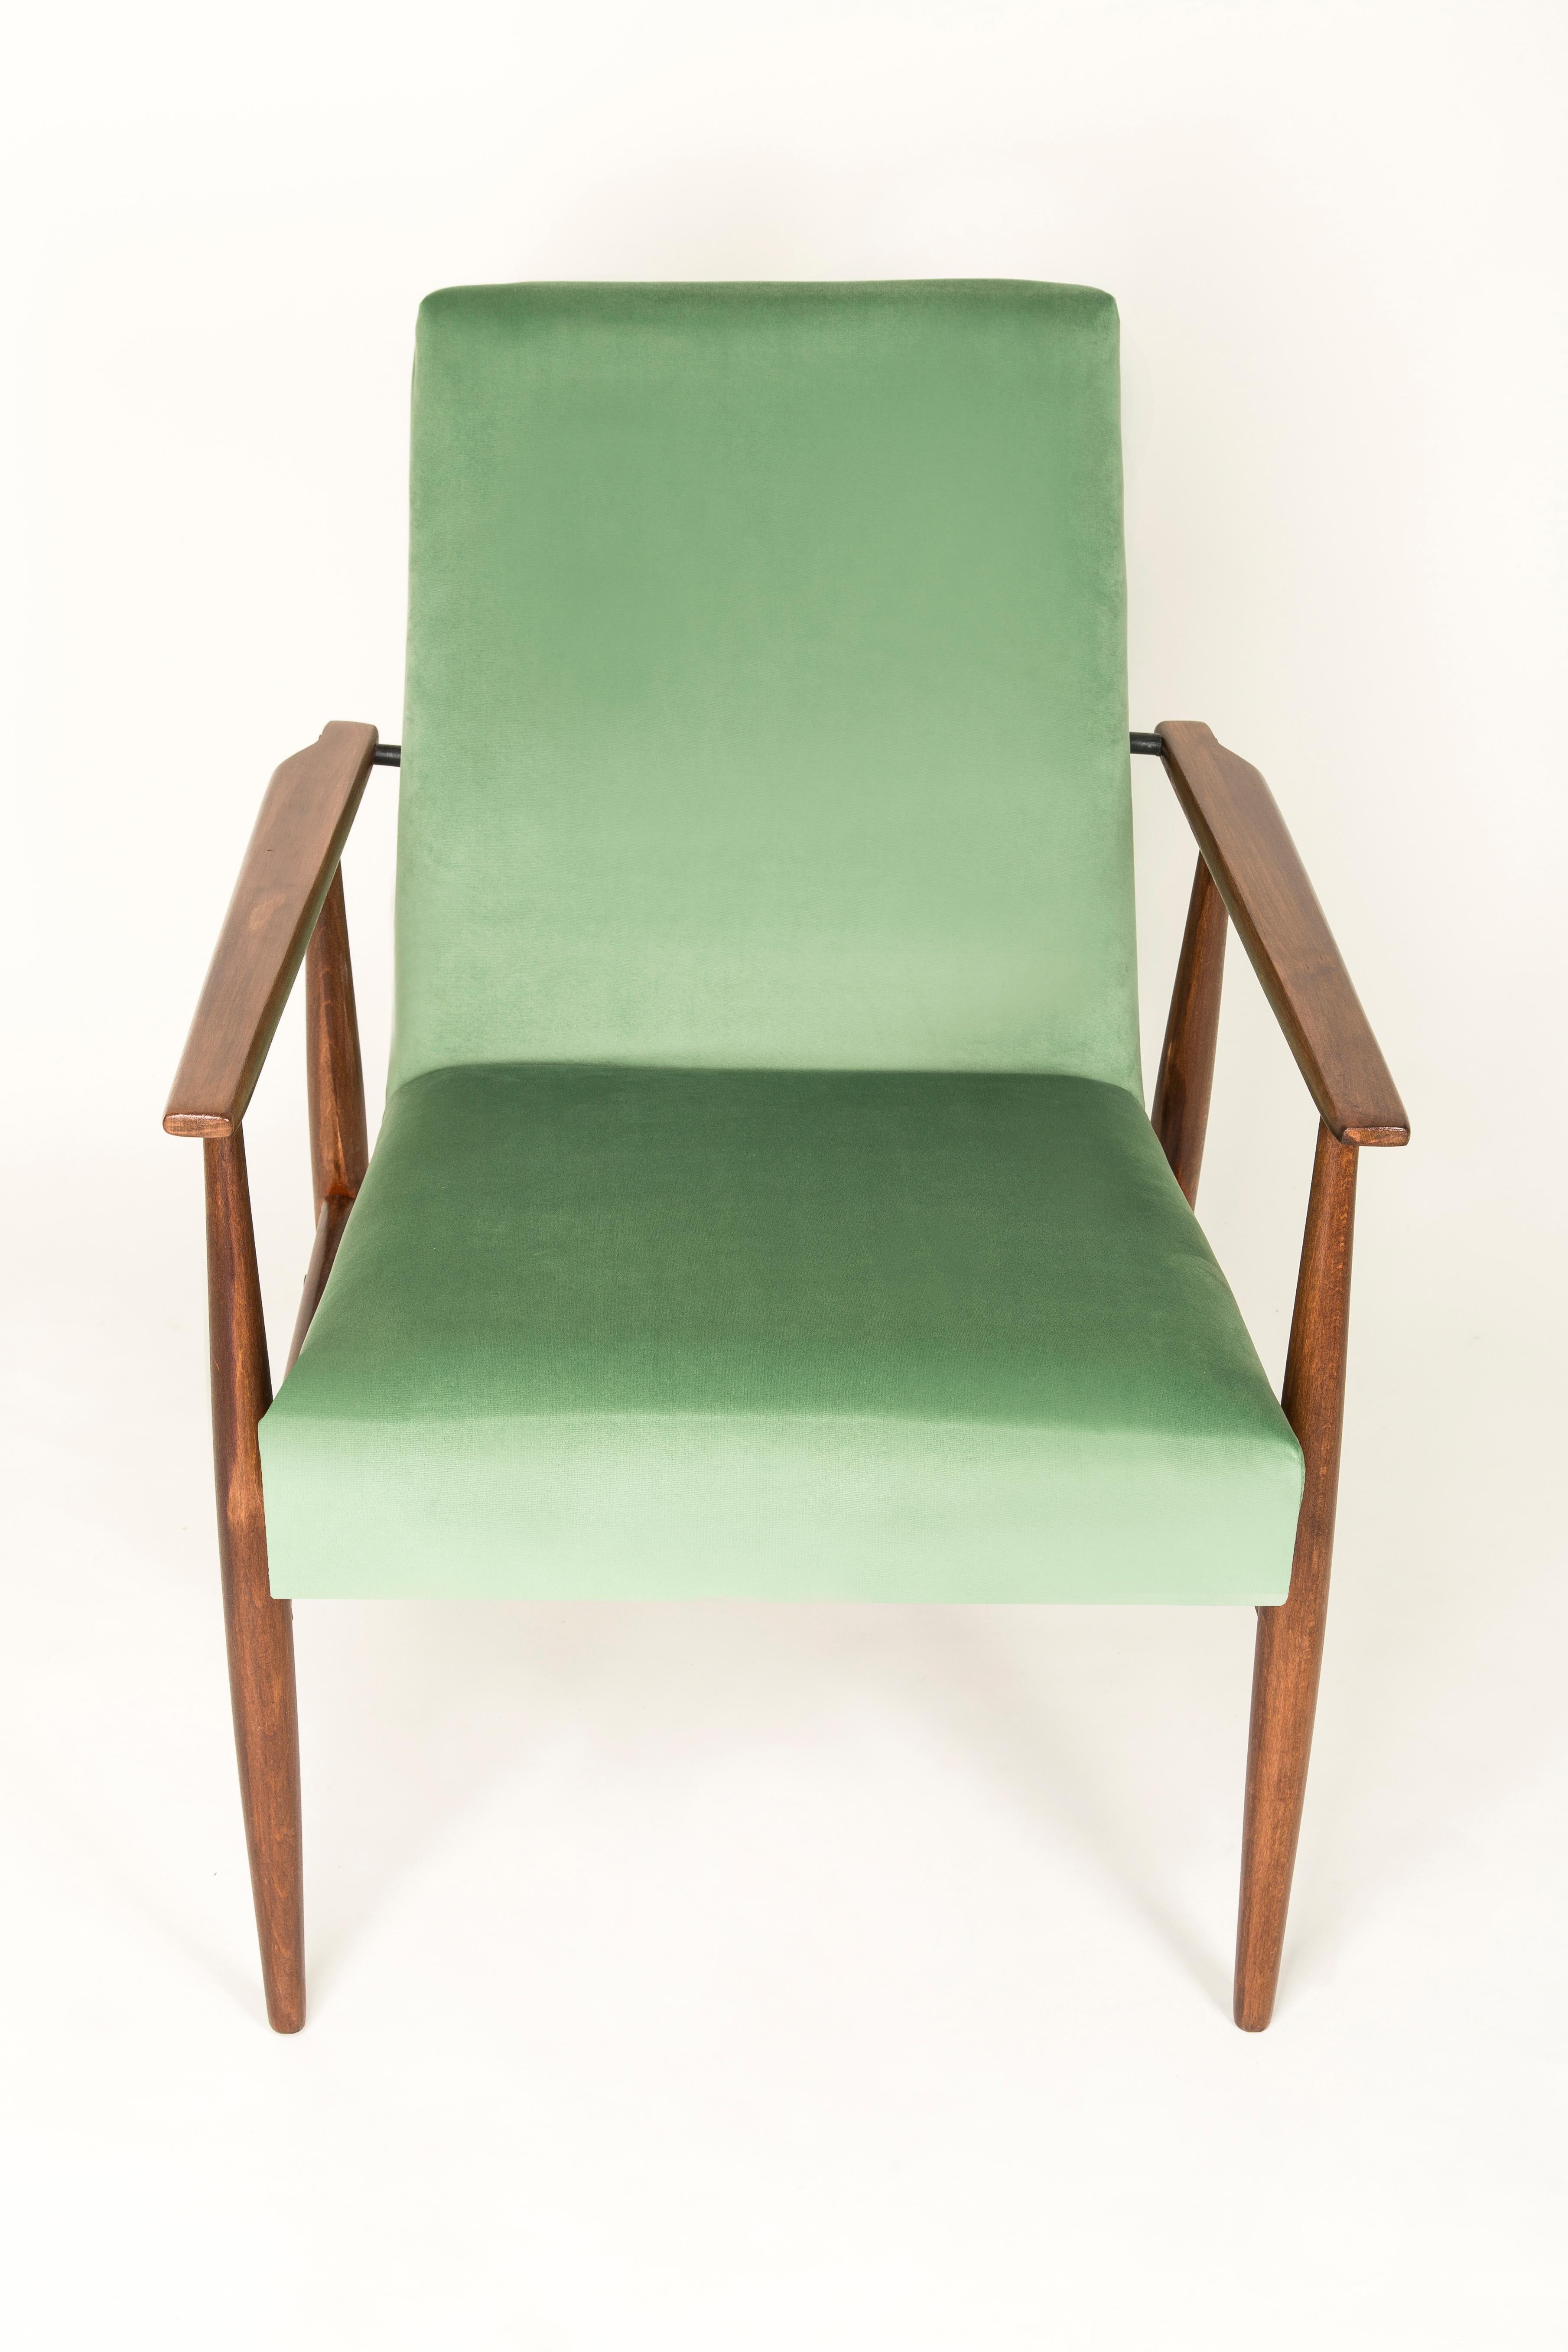 20th Century Pair of Mint Green Dante Armchairs, H. Lis, 1960s In Good Condition For Sale In 05-080 Hornowek, PL